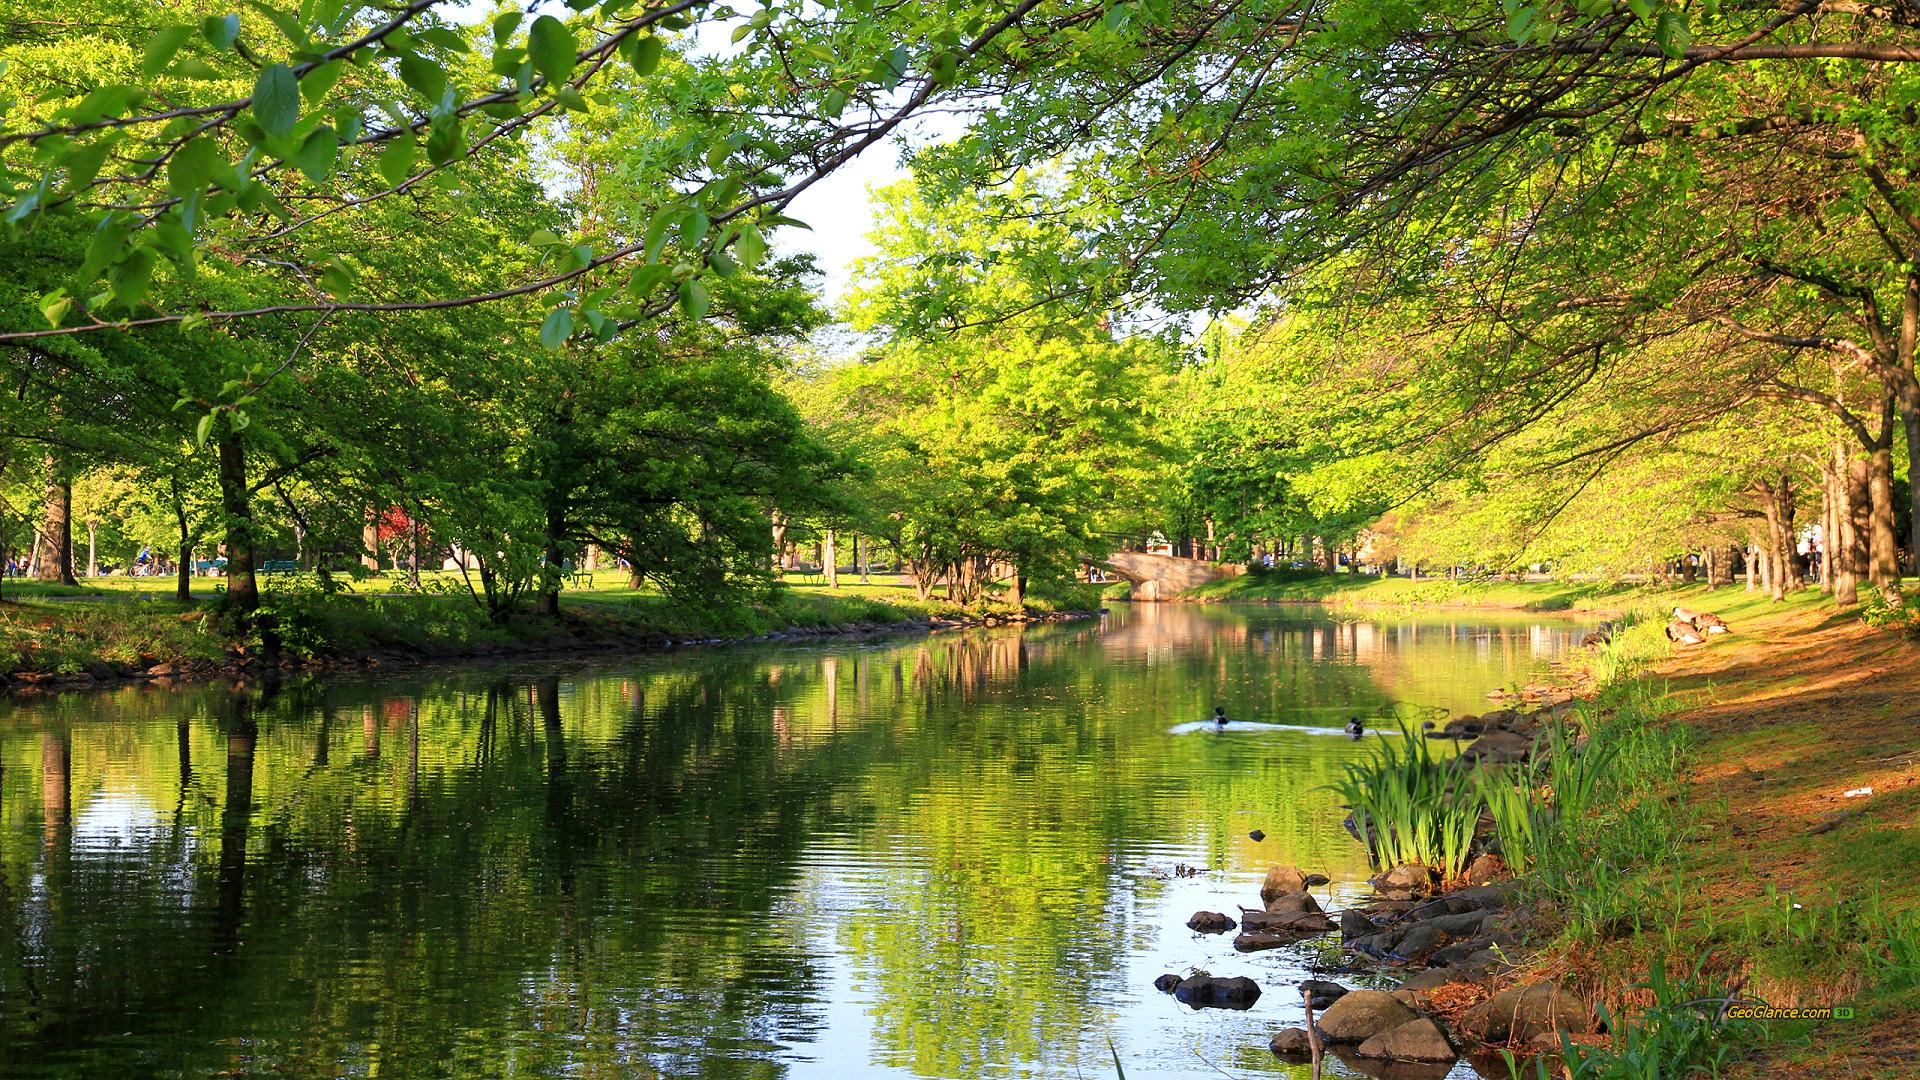 River In A Park On A Sunny Day >> HD Wallpaper, get it now!